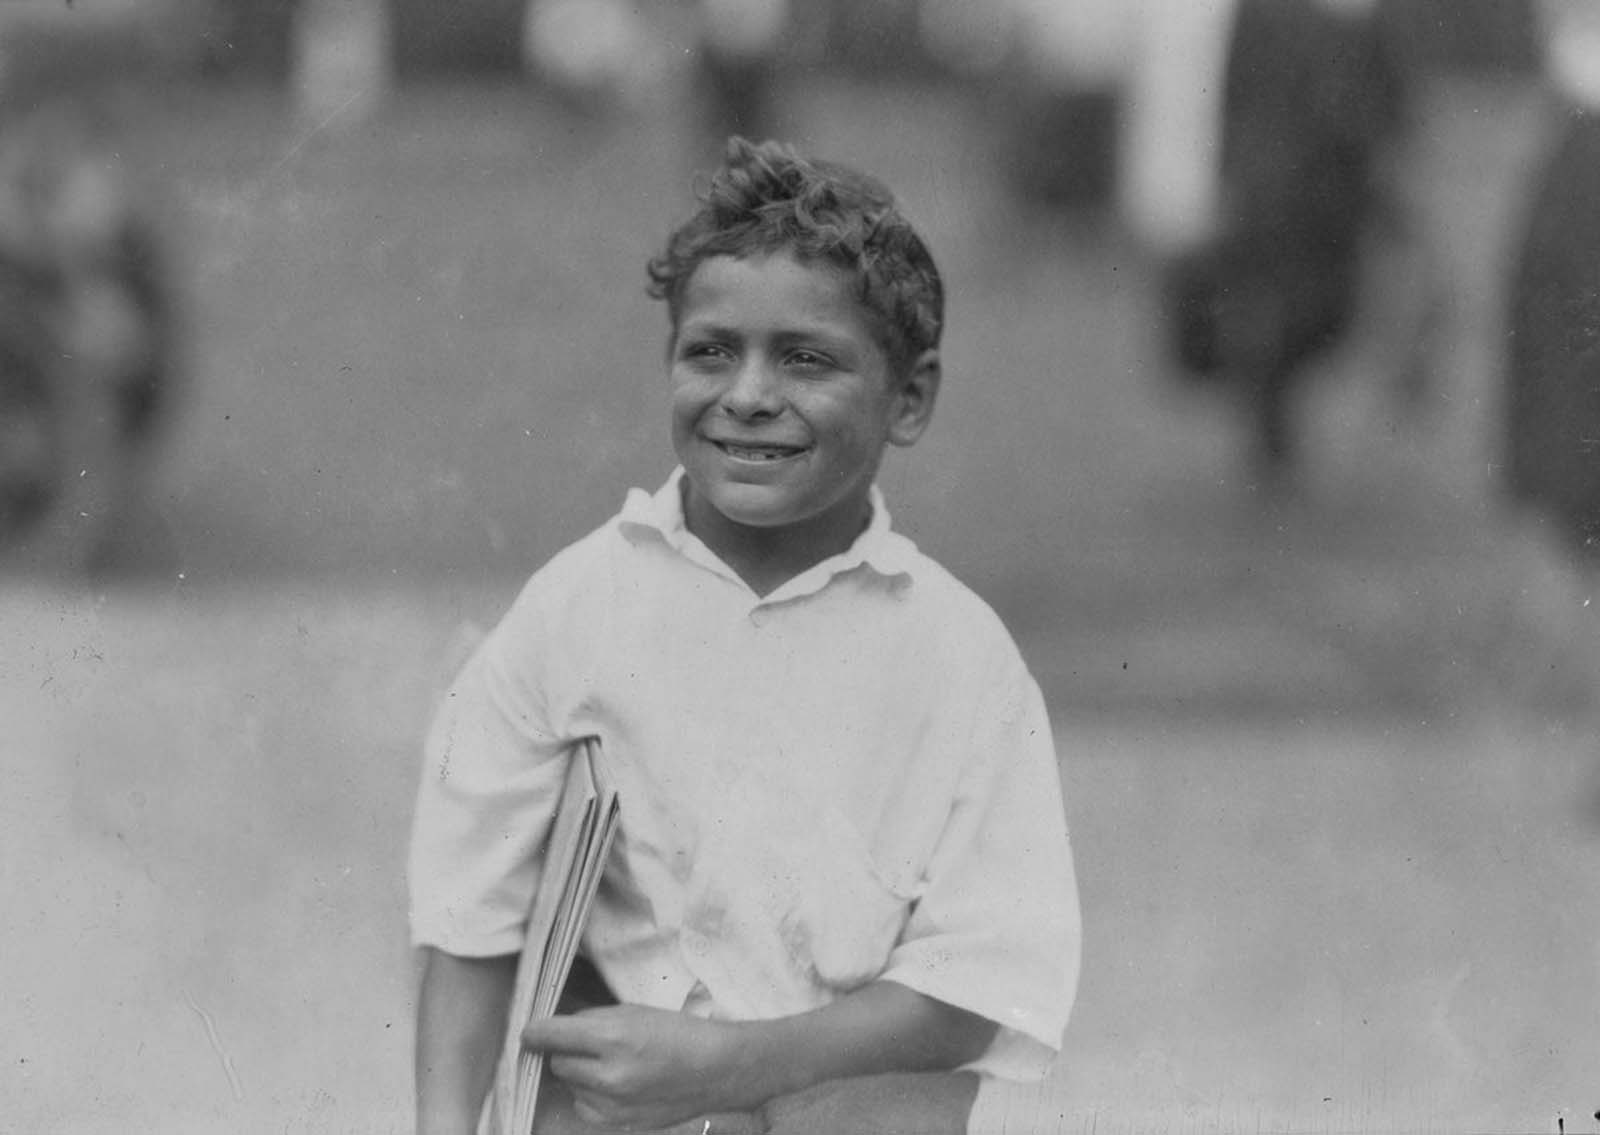 Patsy, 8-year-old newsboy. Says he makes 50 cents a day. Newark, New Jersey, 1924.